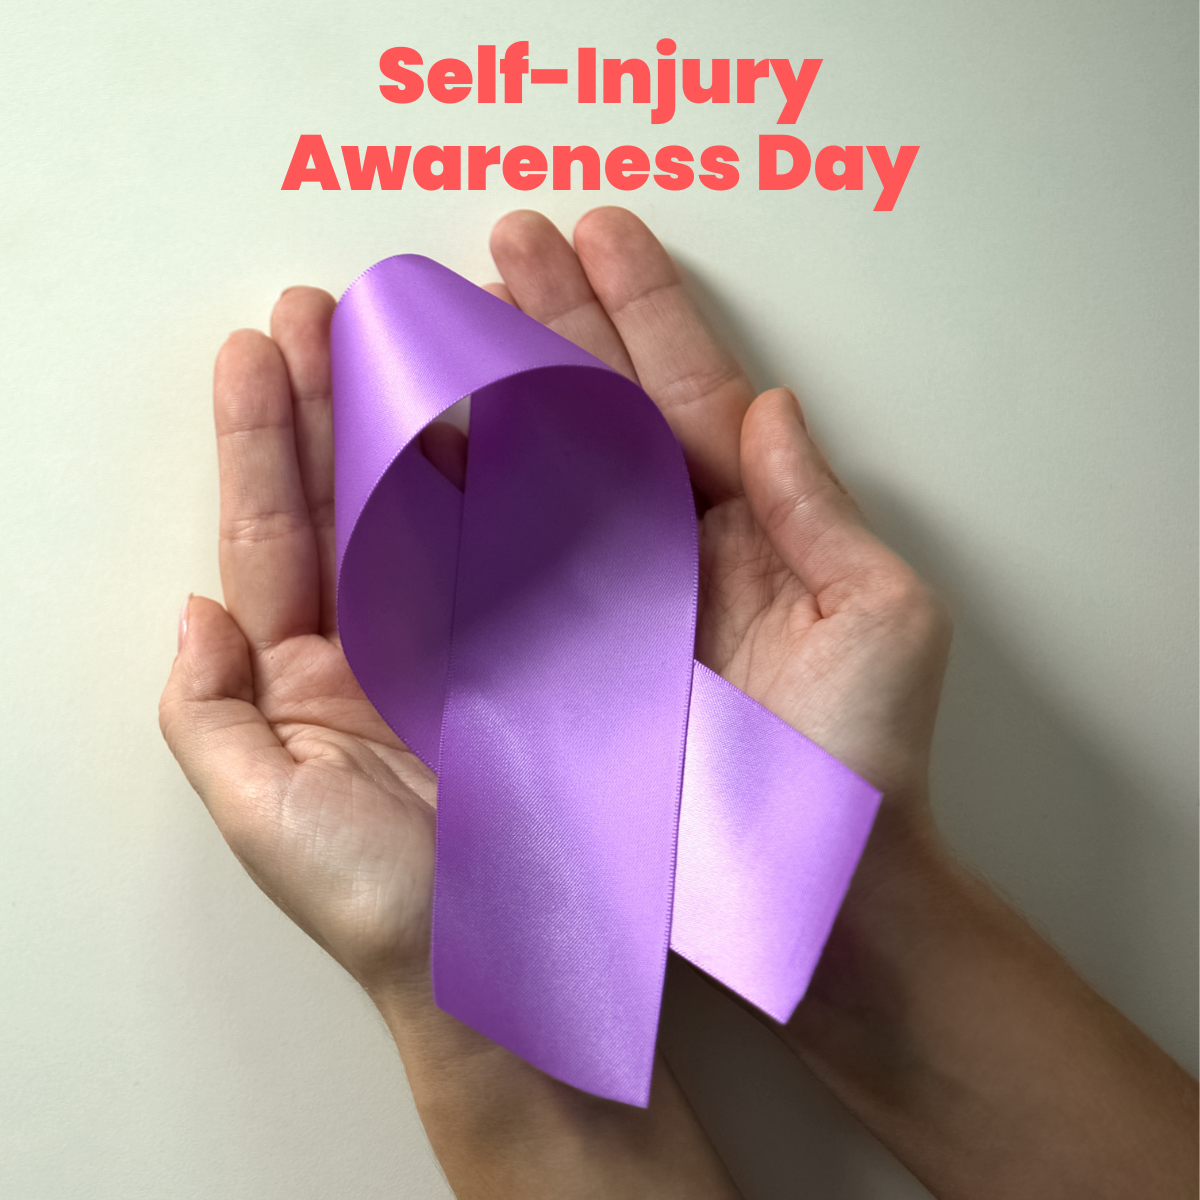 Self-Injury Awareness Day 2023 Quotes, Slogans, Images, Messages, Posters, Banners, Cliparts and Captions